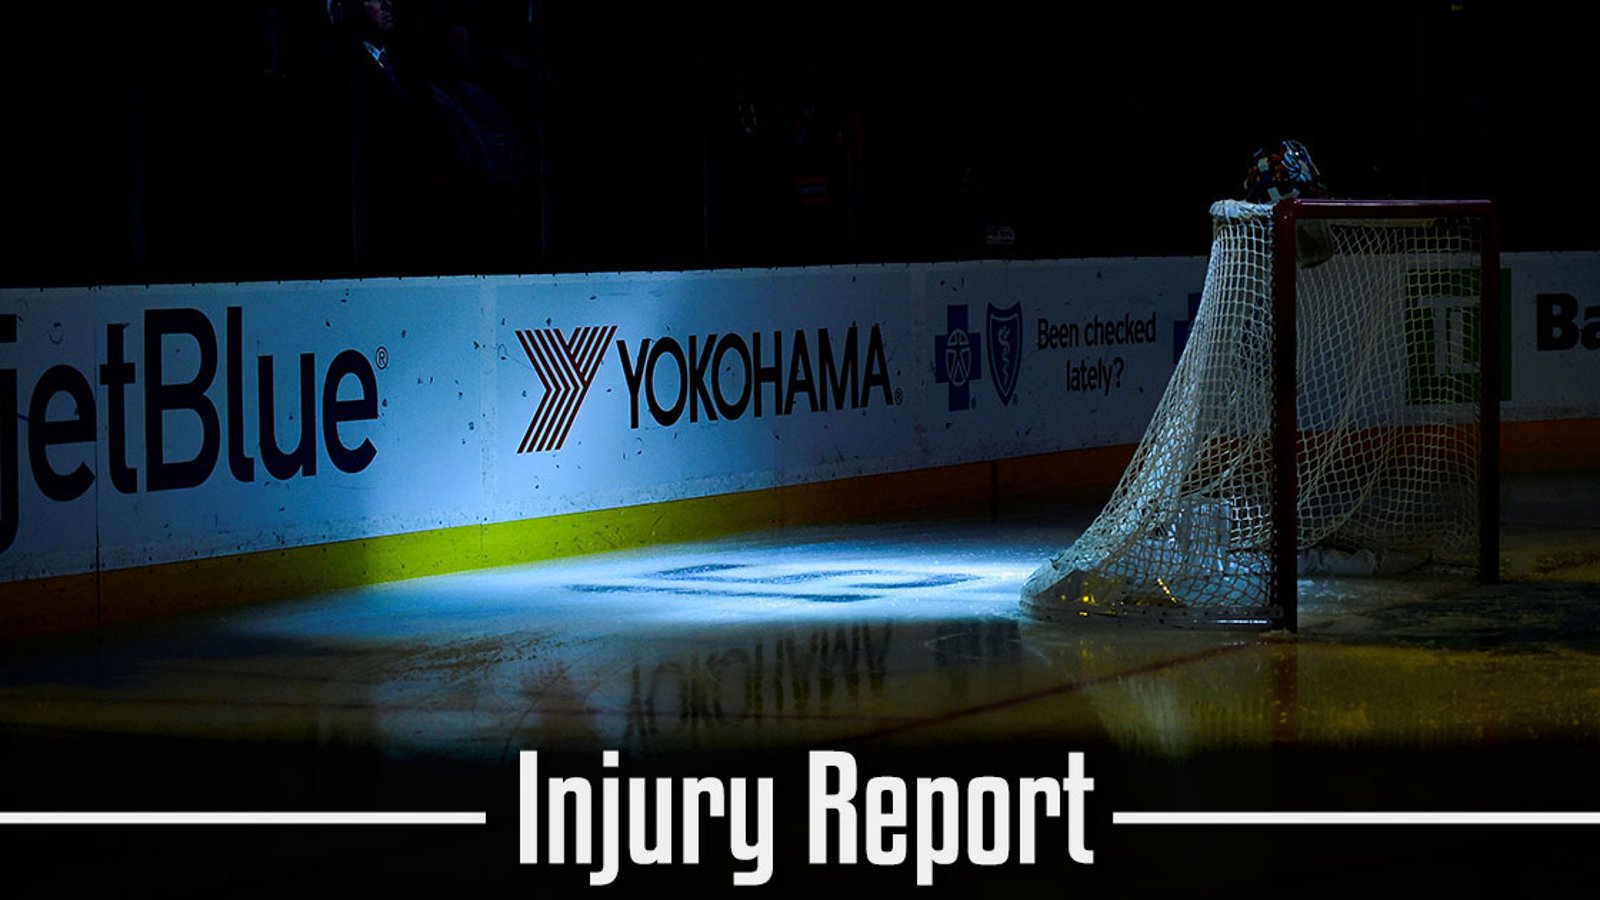 Season-ending injury for this once spectacular goalie.  